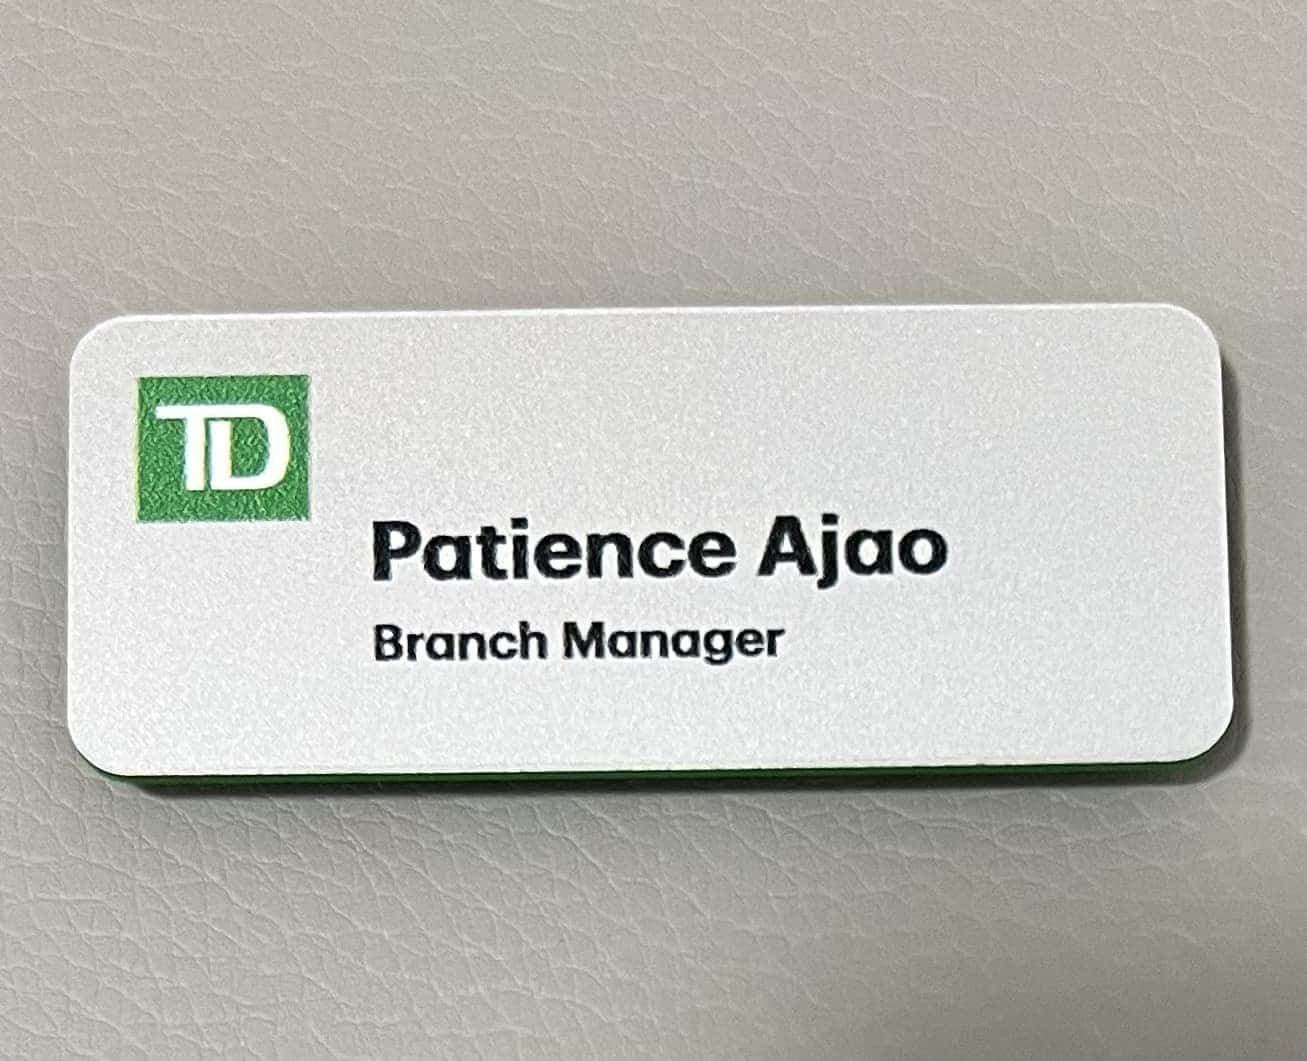 Excited Nigerian woman narrates struggle as she becomes branch manager of a Canada's leading bank